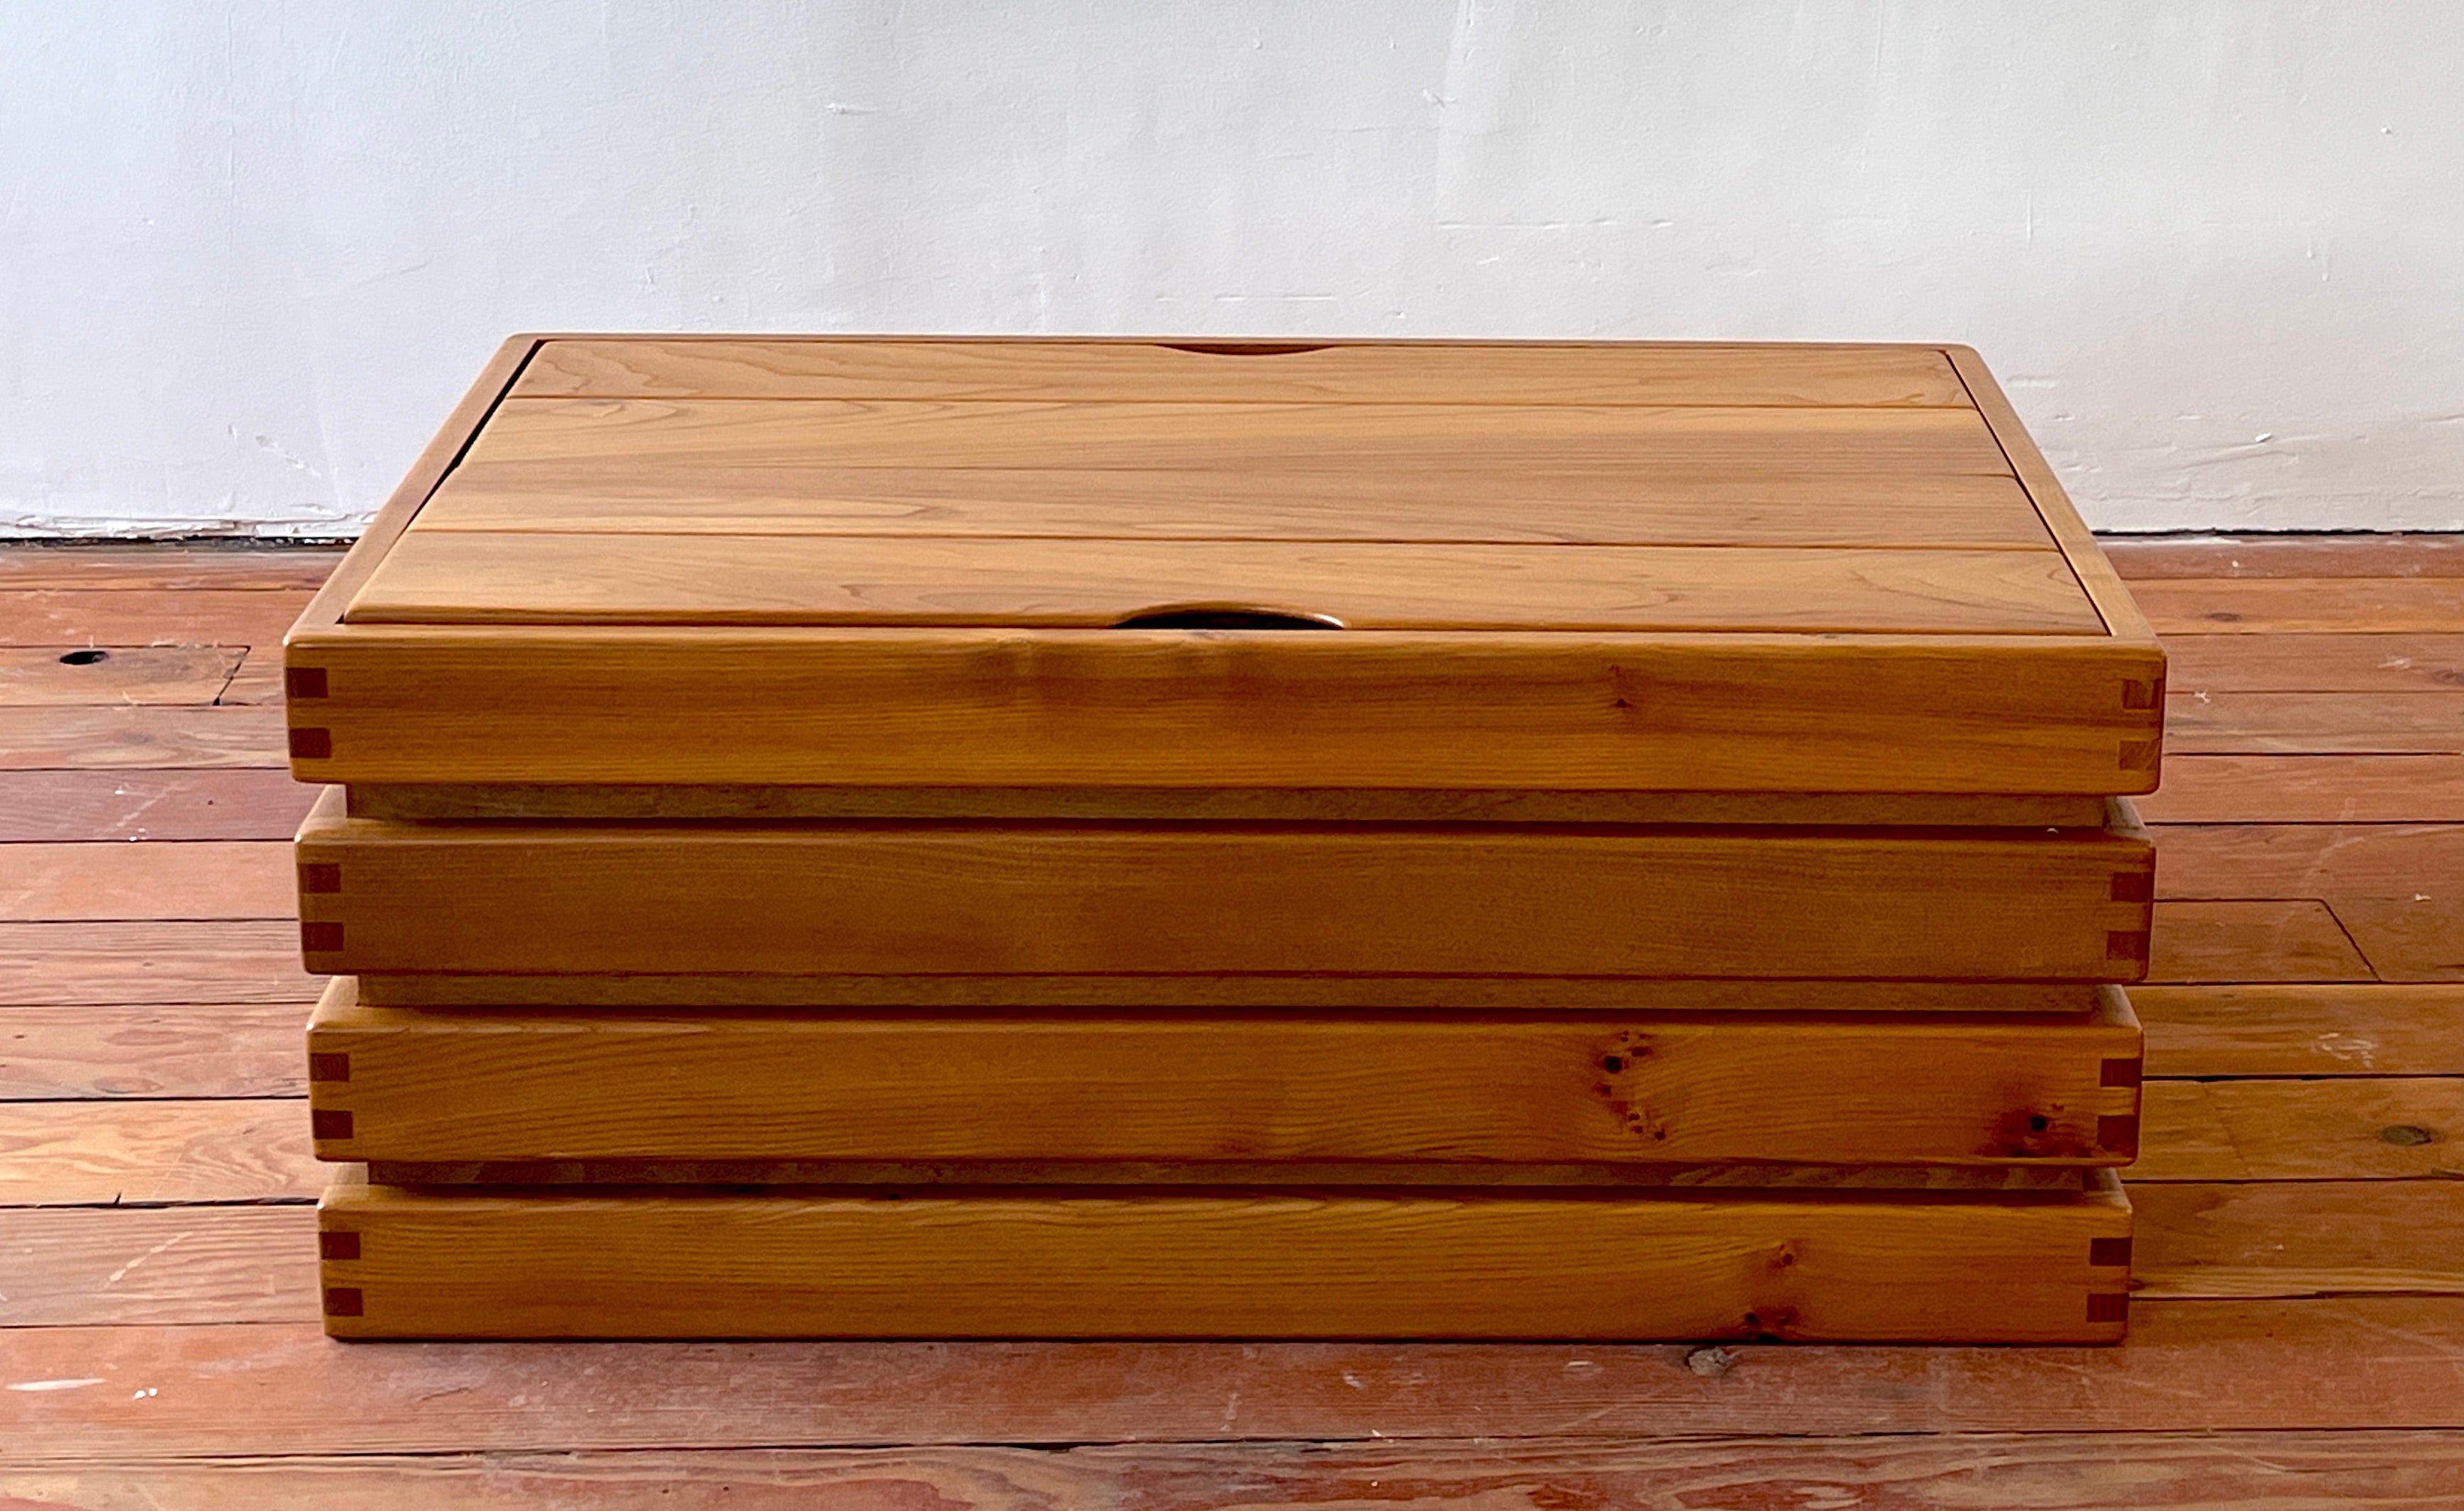 Storage Trunk Coffee Table Bench – Christian's Table